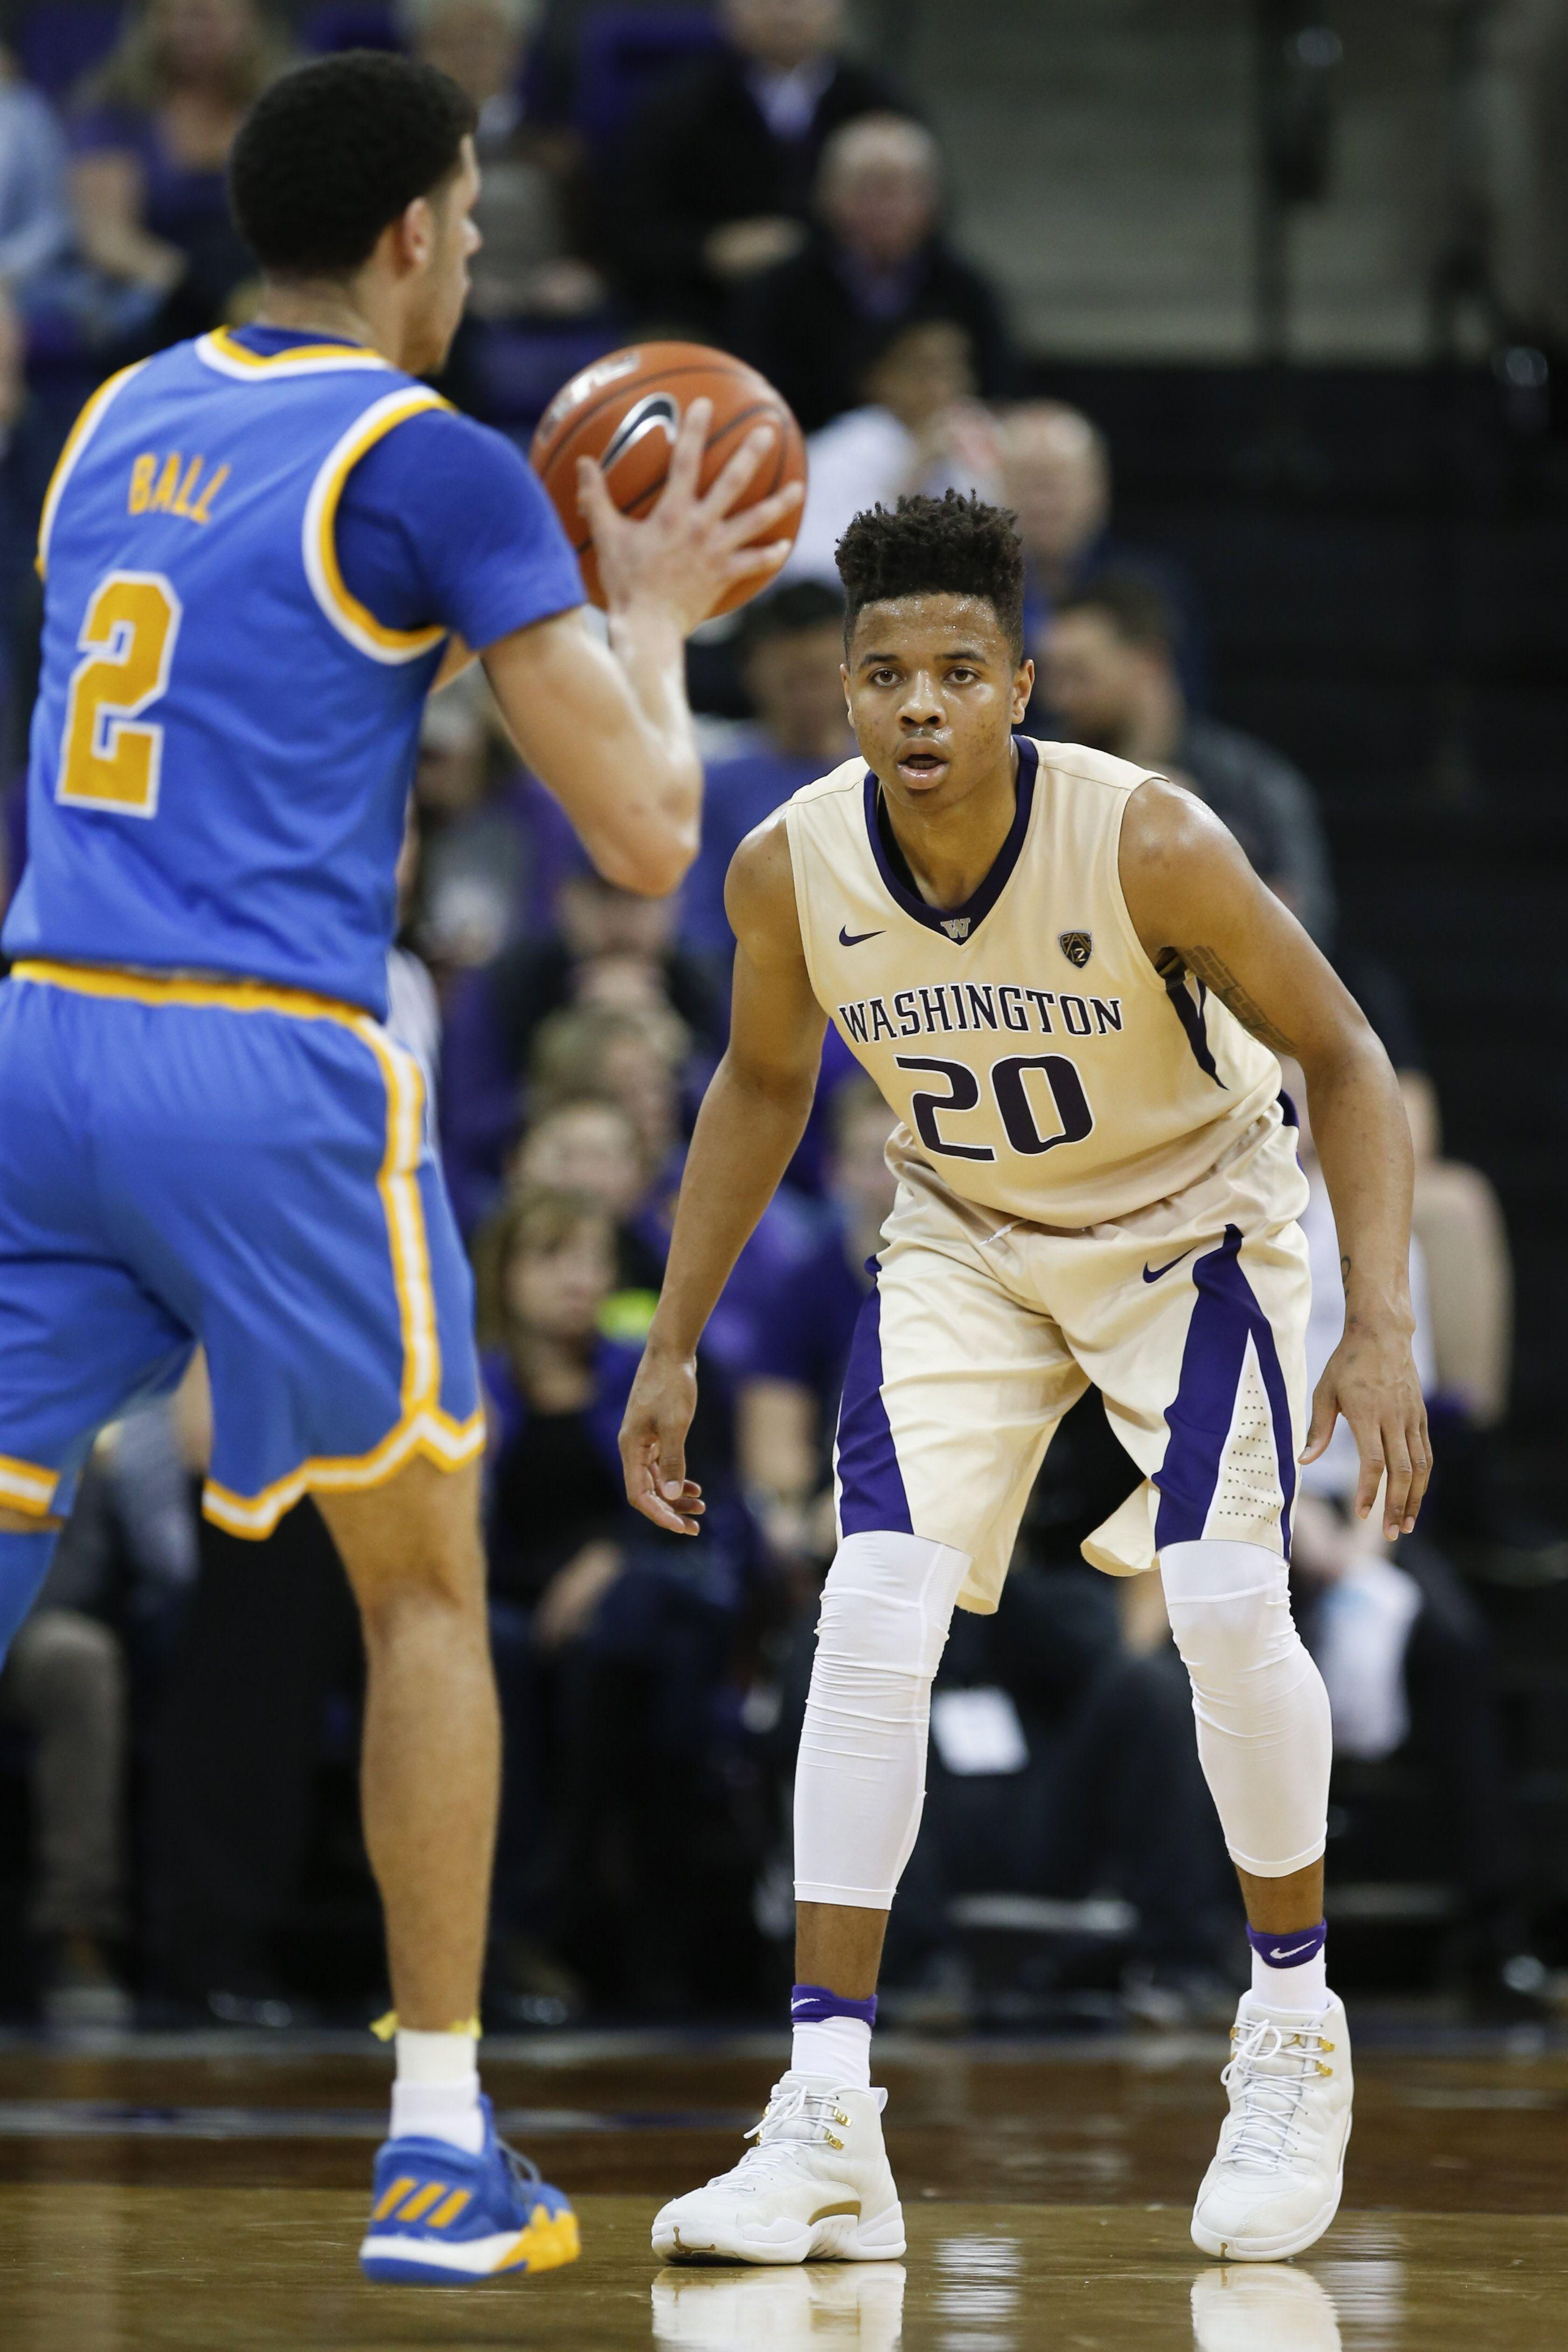 NBA Draft notebook: Markelle Fultz and Dennis Smith Jr. are one